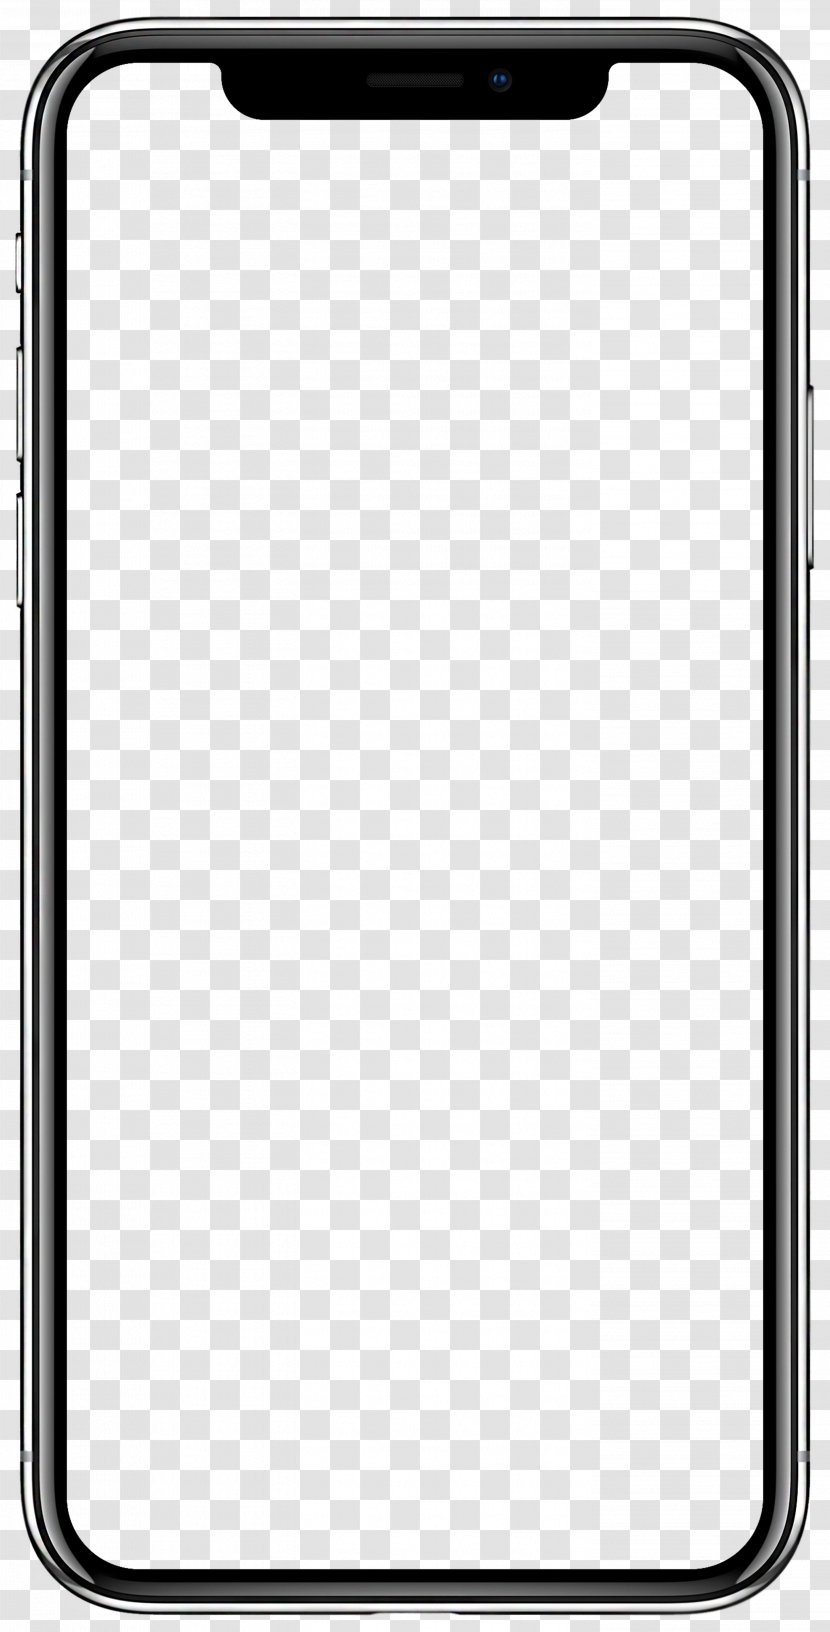 IPhone X App Store Apple IOS 11 - Telephony Transparent PNG